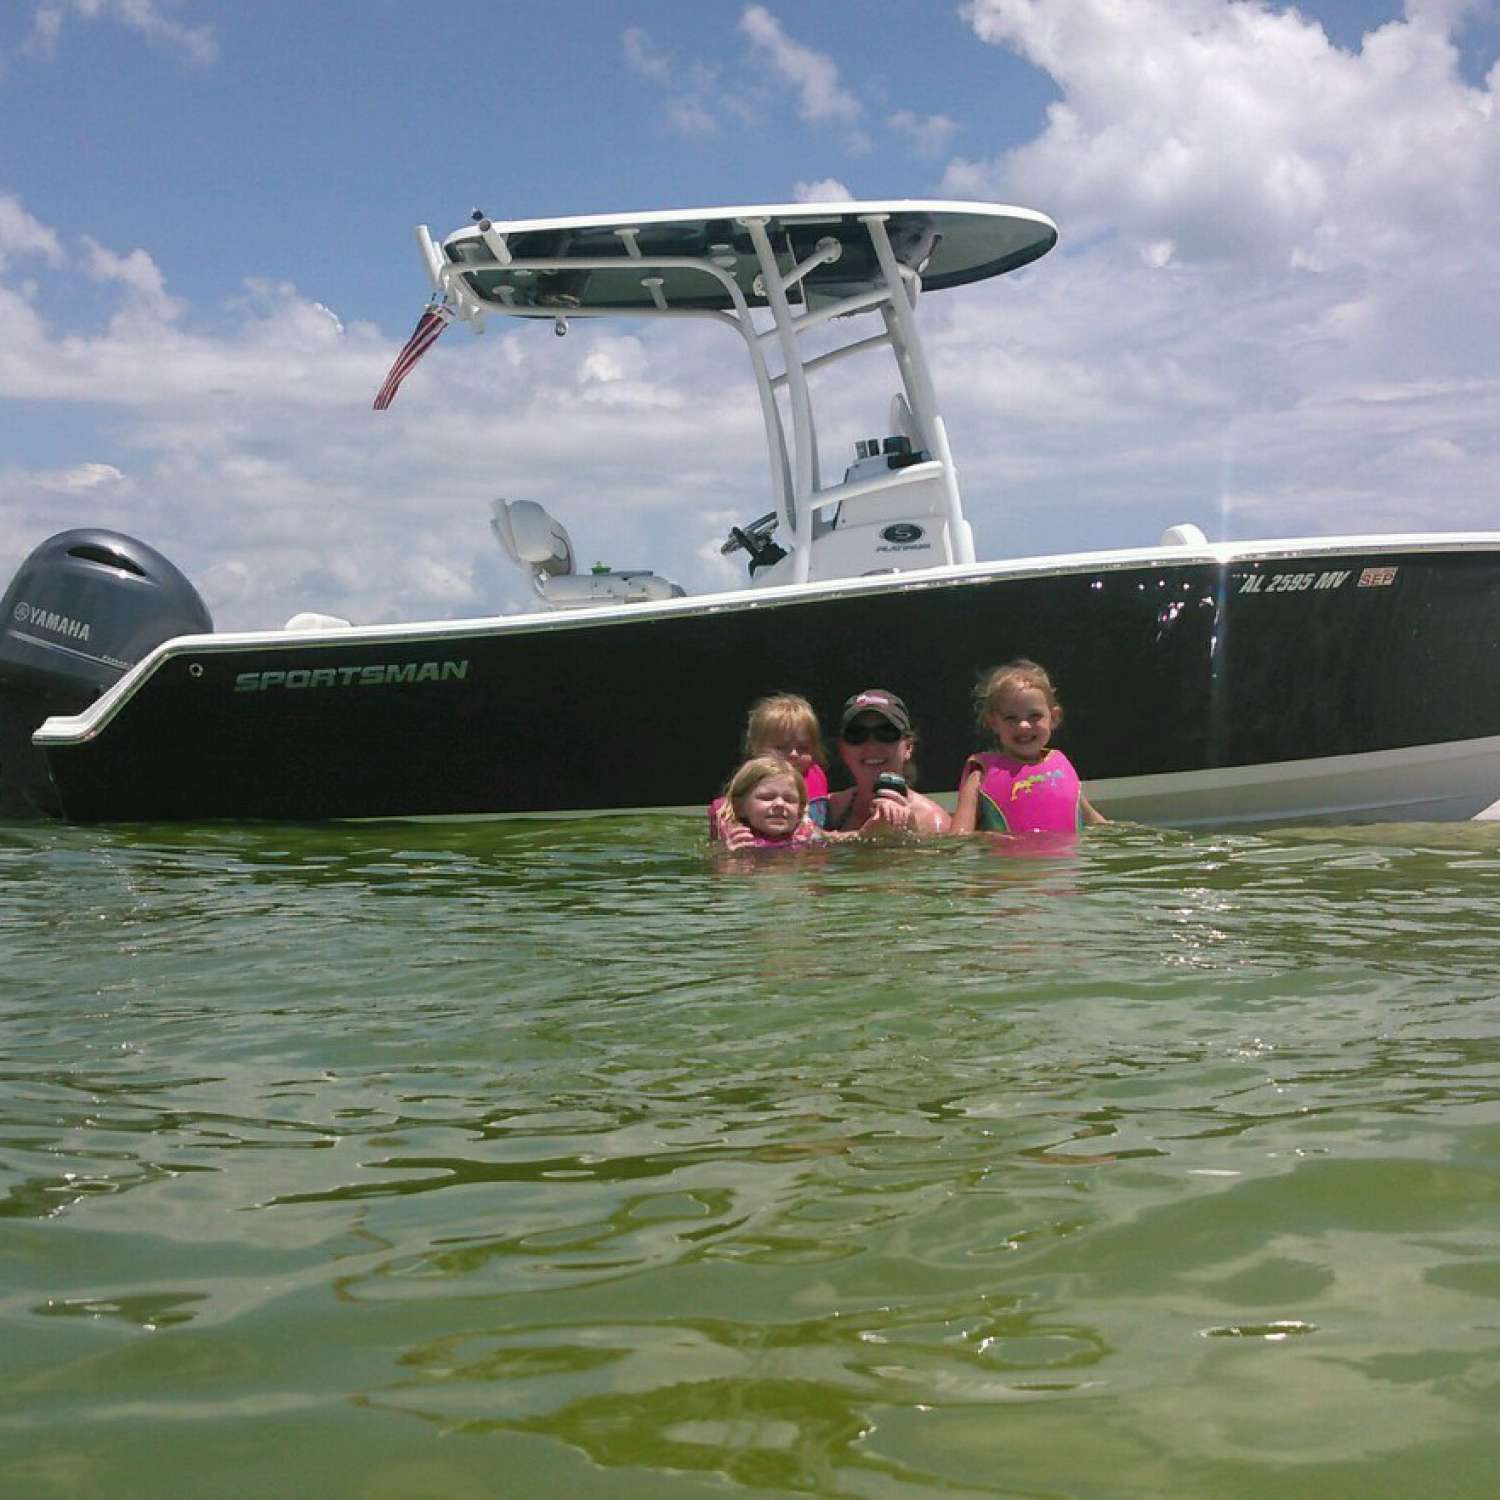 My photo was taken at Destin, FL. My friends sister and her kids had a great time on the water.